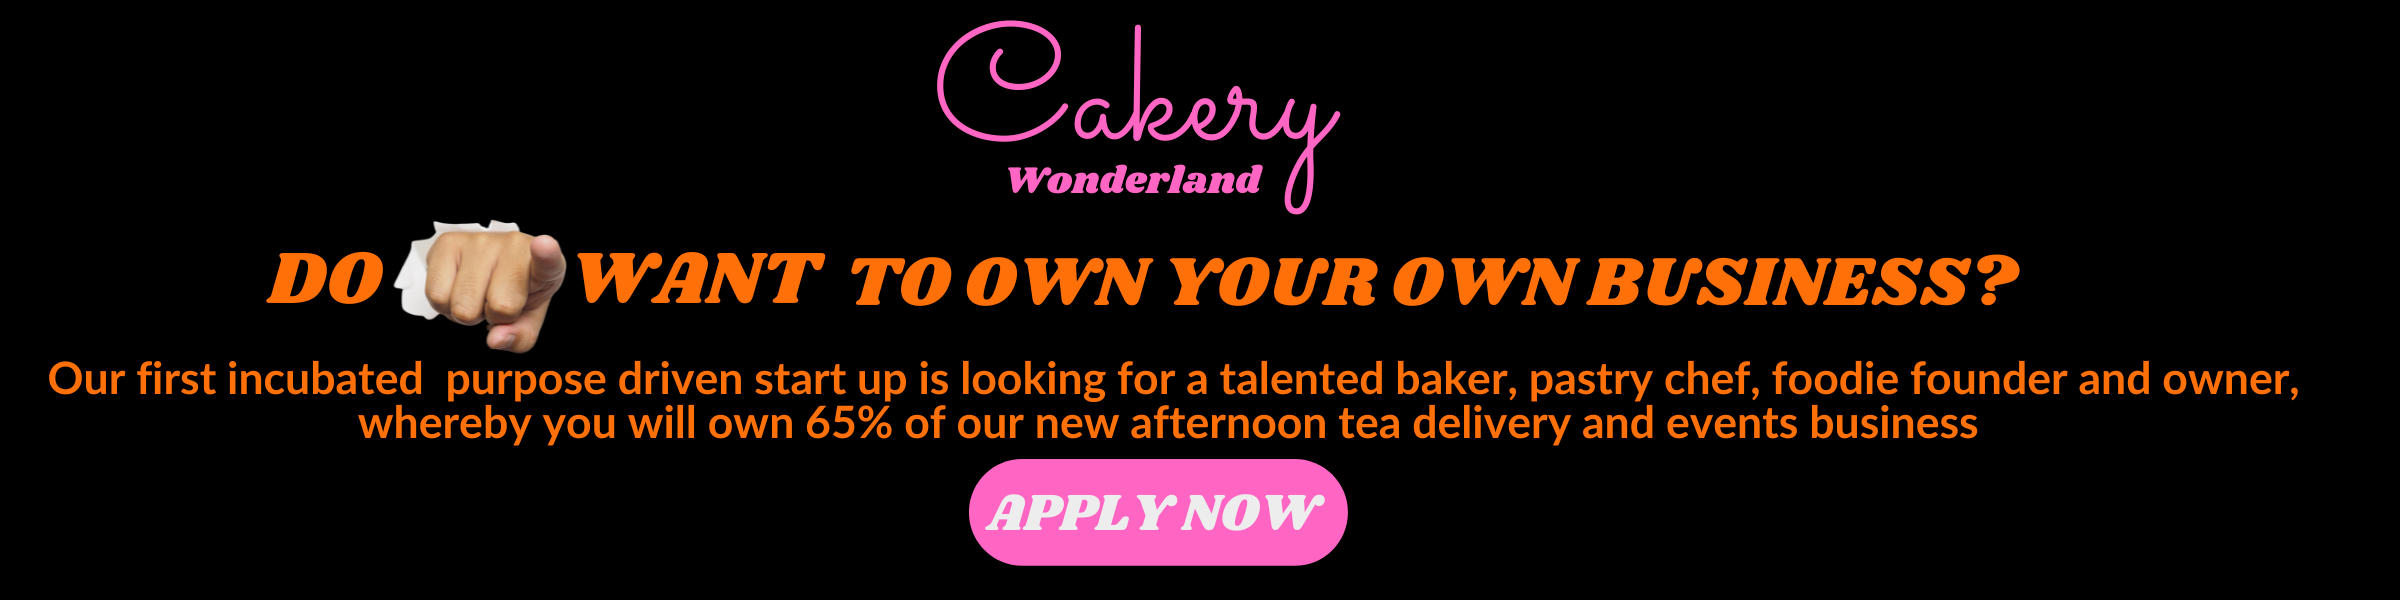 apply to become the founder of cakery wonderland 